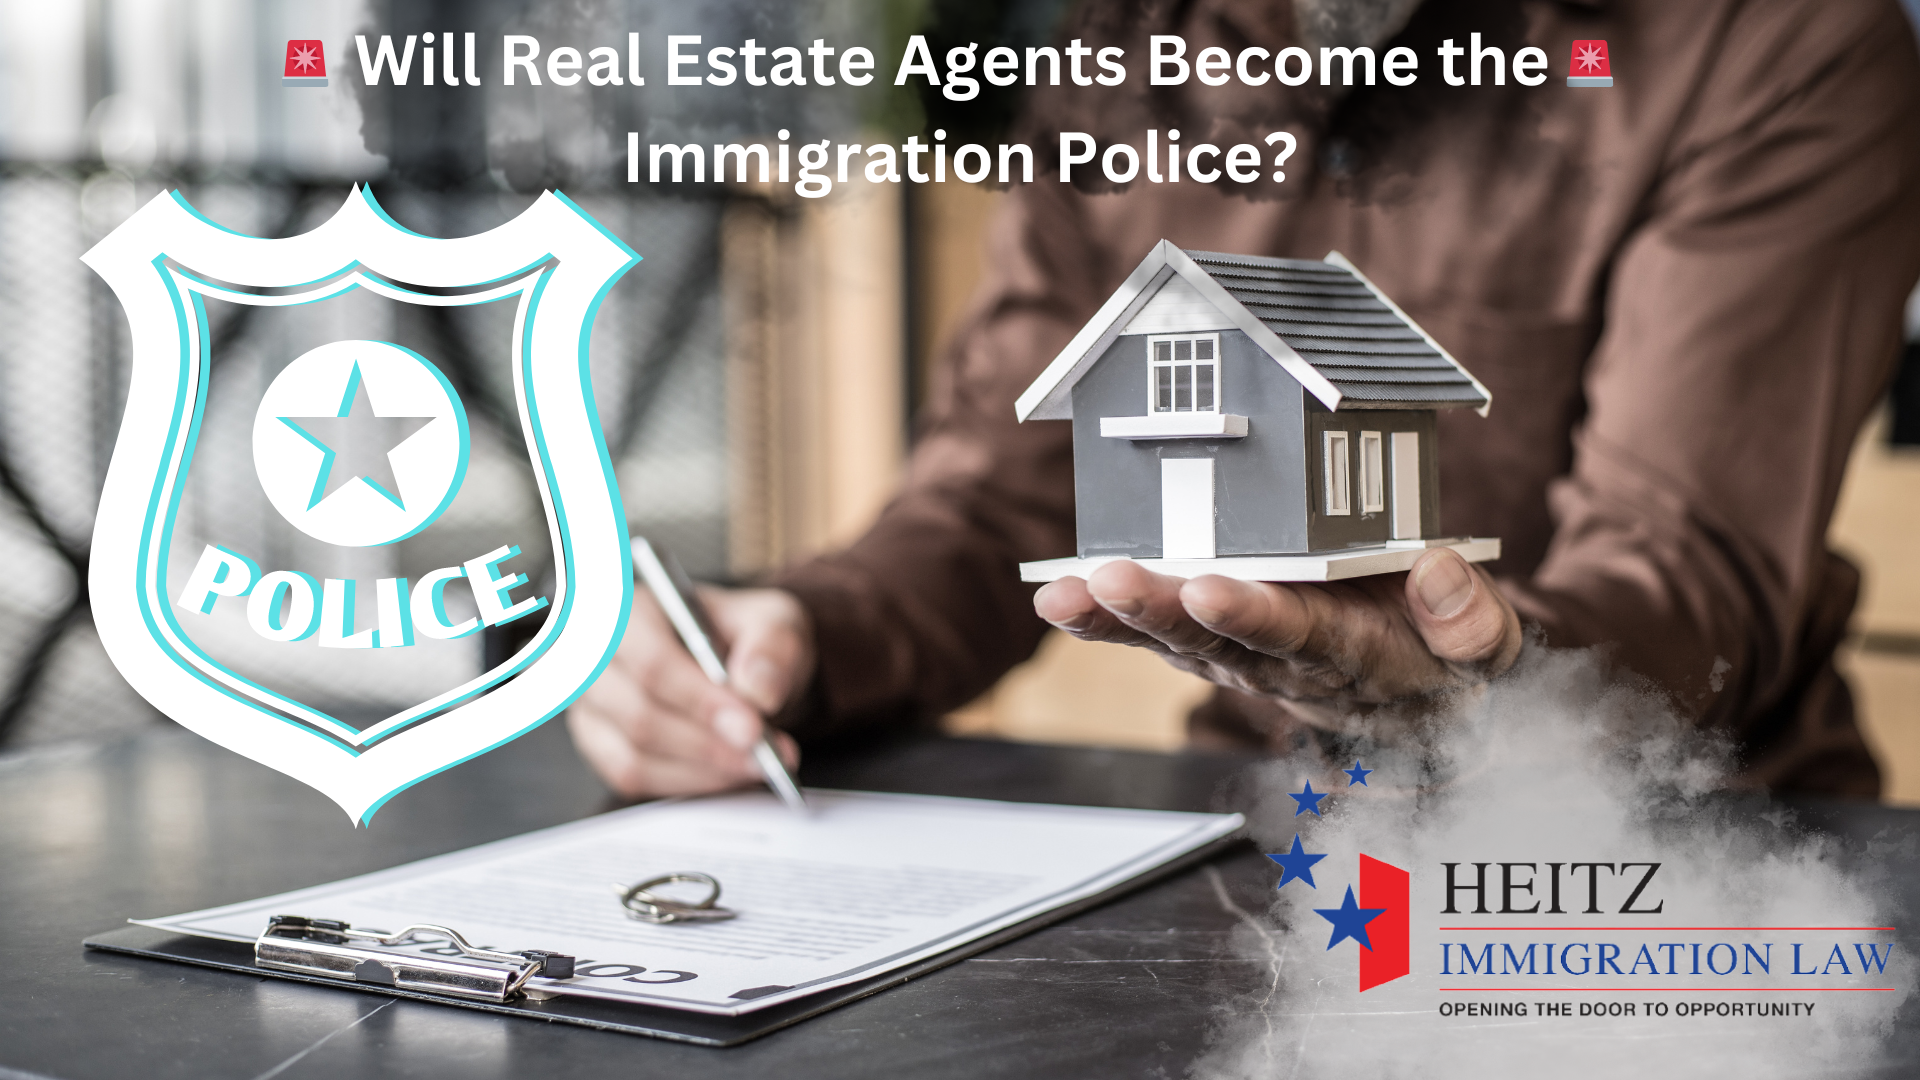 Florida’s New Law Raises Concerns: Will Real Estate Agents Become the Immigration Police?